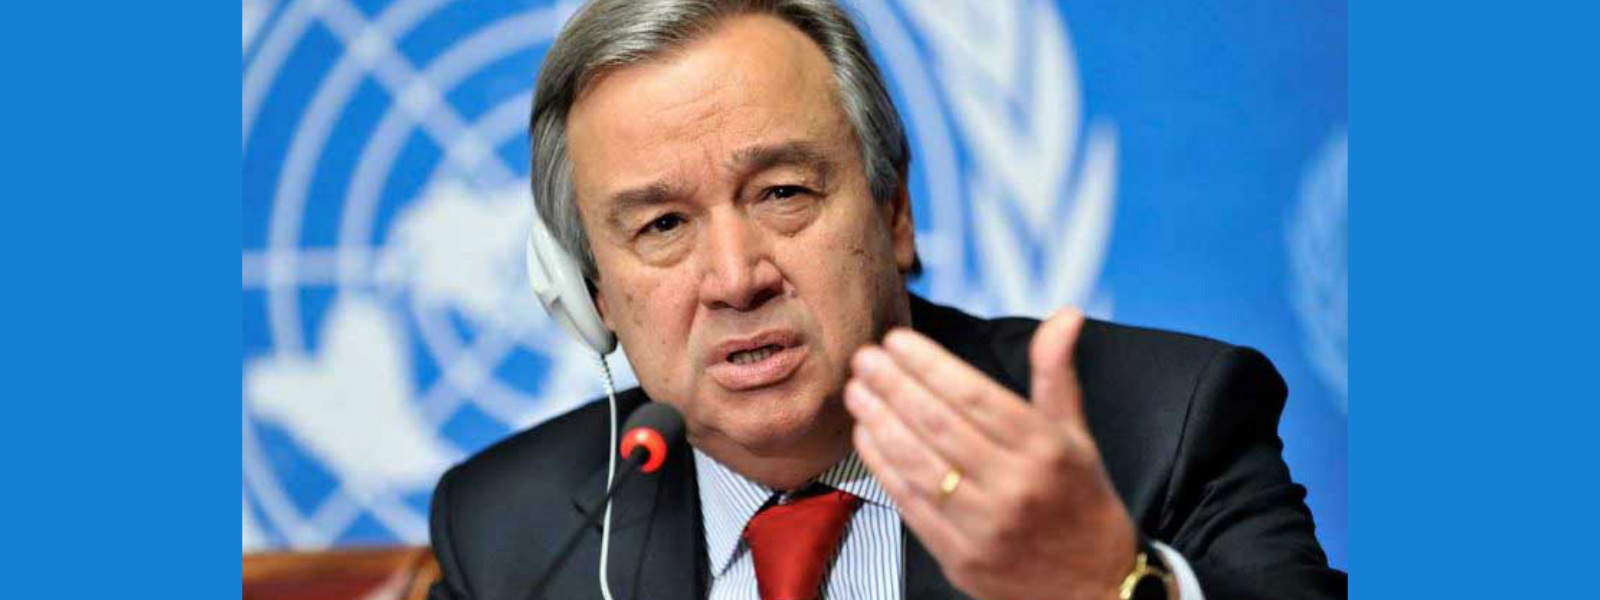 ERA OF GLOBAL BOILING: UN Chief coins new phrase